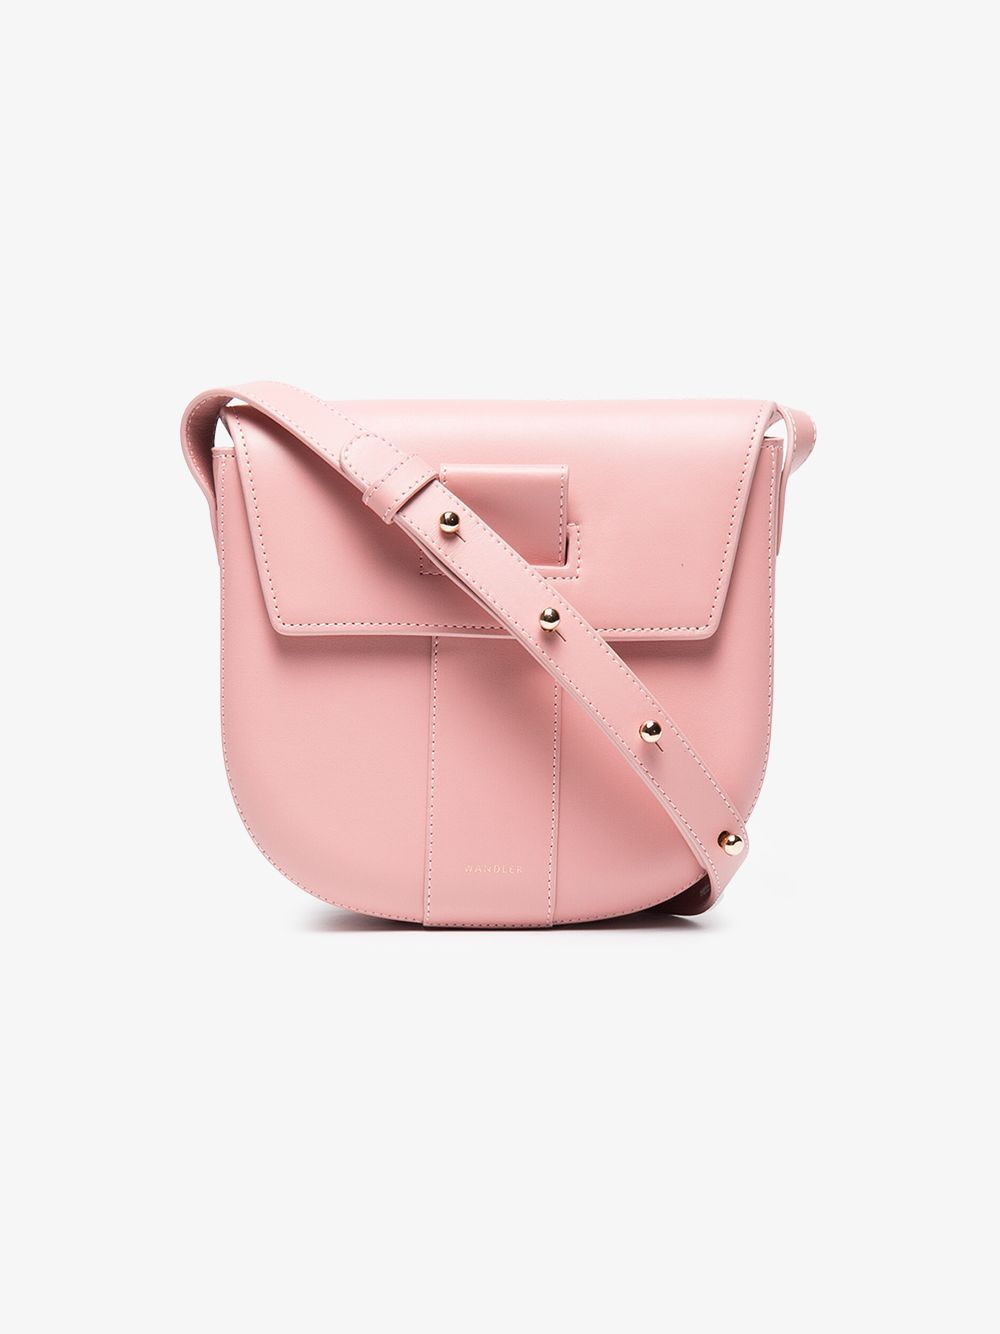 Wandler Pink Miles leather cross body bag | Browns Fashion